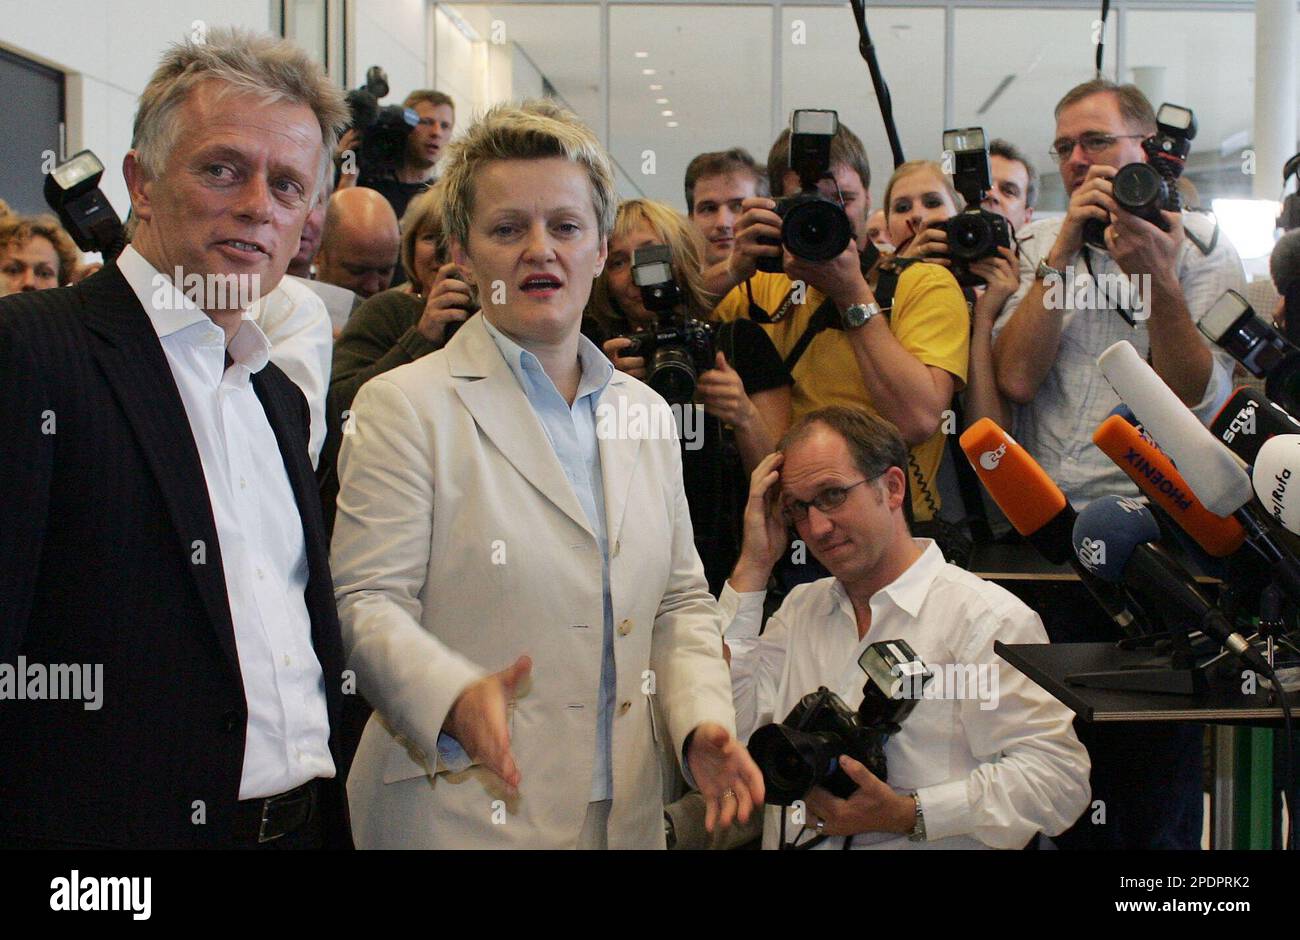 Die Gruenen Fritz Kuhn, links, und Renate Kuenast nach ihrer Wahl zu den neuen Fraktionsvorsitzenden der Gruenen - Bundestagsfraktion im Reichstag in Berlin am Dienstag, 27. September 2005.(AP Photo/Markus Schreiber) --- German Green's Fritz Kuhn, left, and Renate Kuenast pose for media after they were elected as new faction leader in Berlin on Tuesday, Sept. 27, 2005. The Greens, seeking to maintain a high profile as they prepare for opposition, on Tuesday chose a combative outgoing minister and a respected former party chairman to lead them in parliament.(AP Photo/Markus Schreiber) Stockfoto